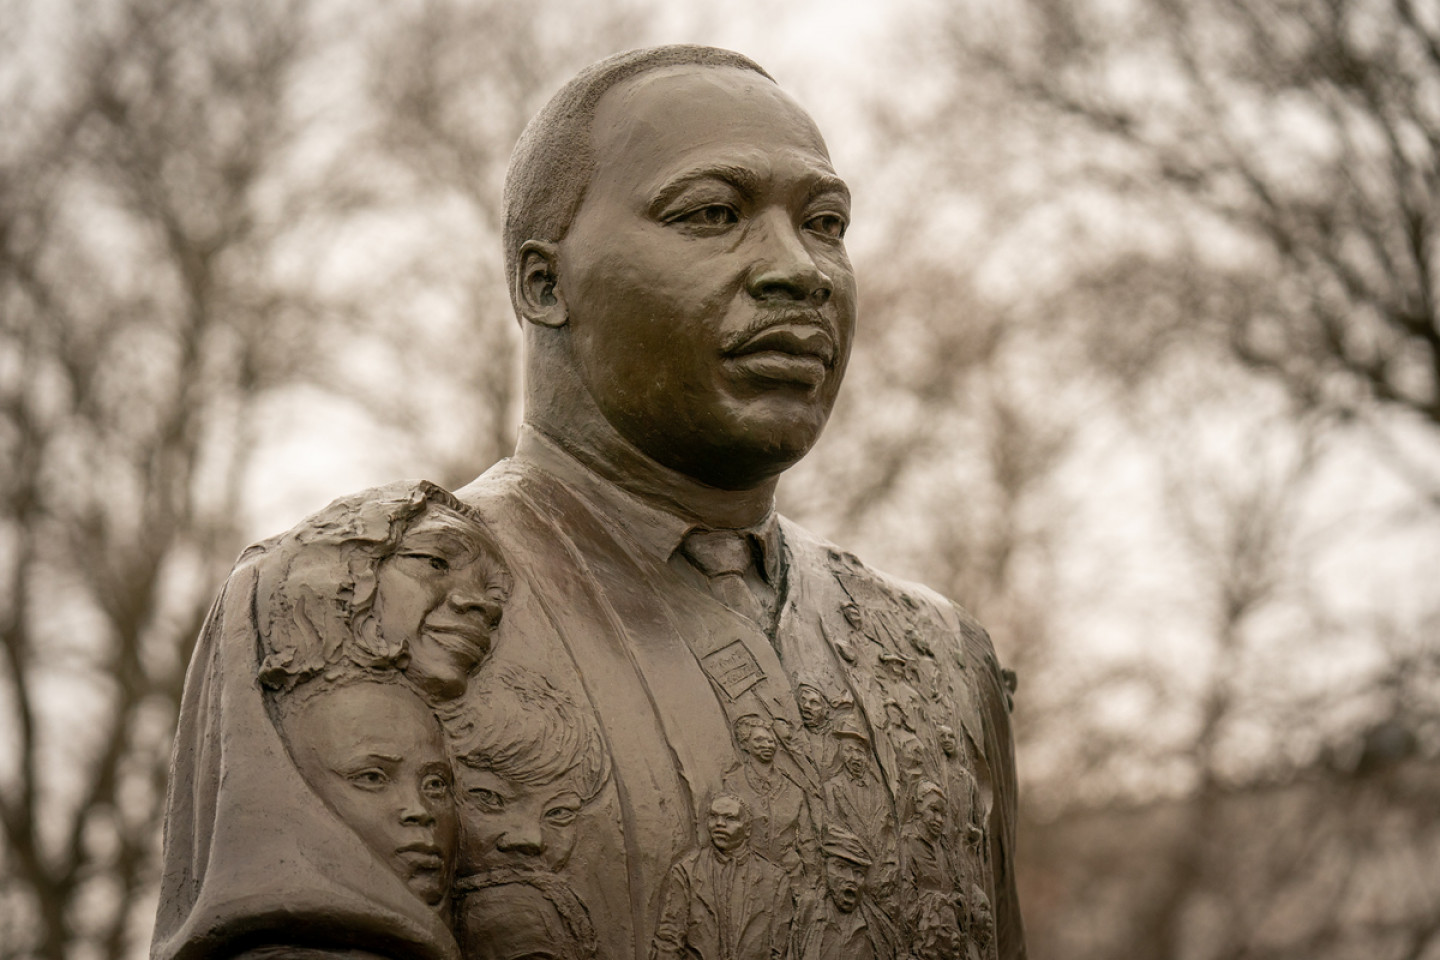 Photo of statue of Martin Luther King Jr.